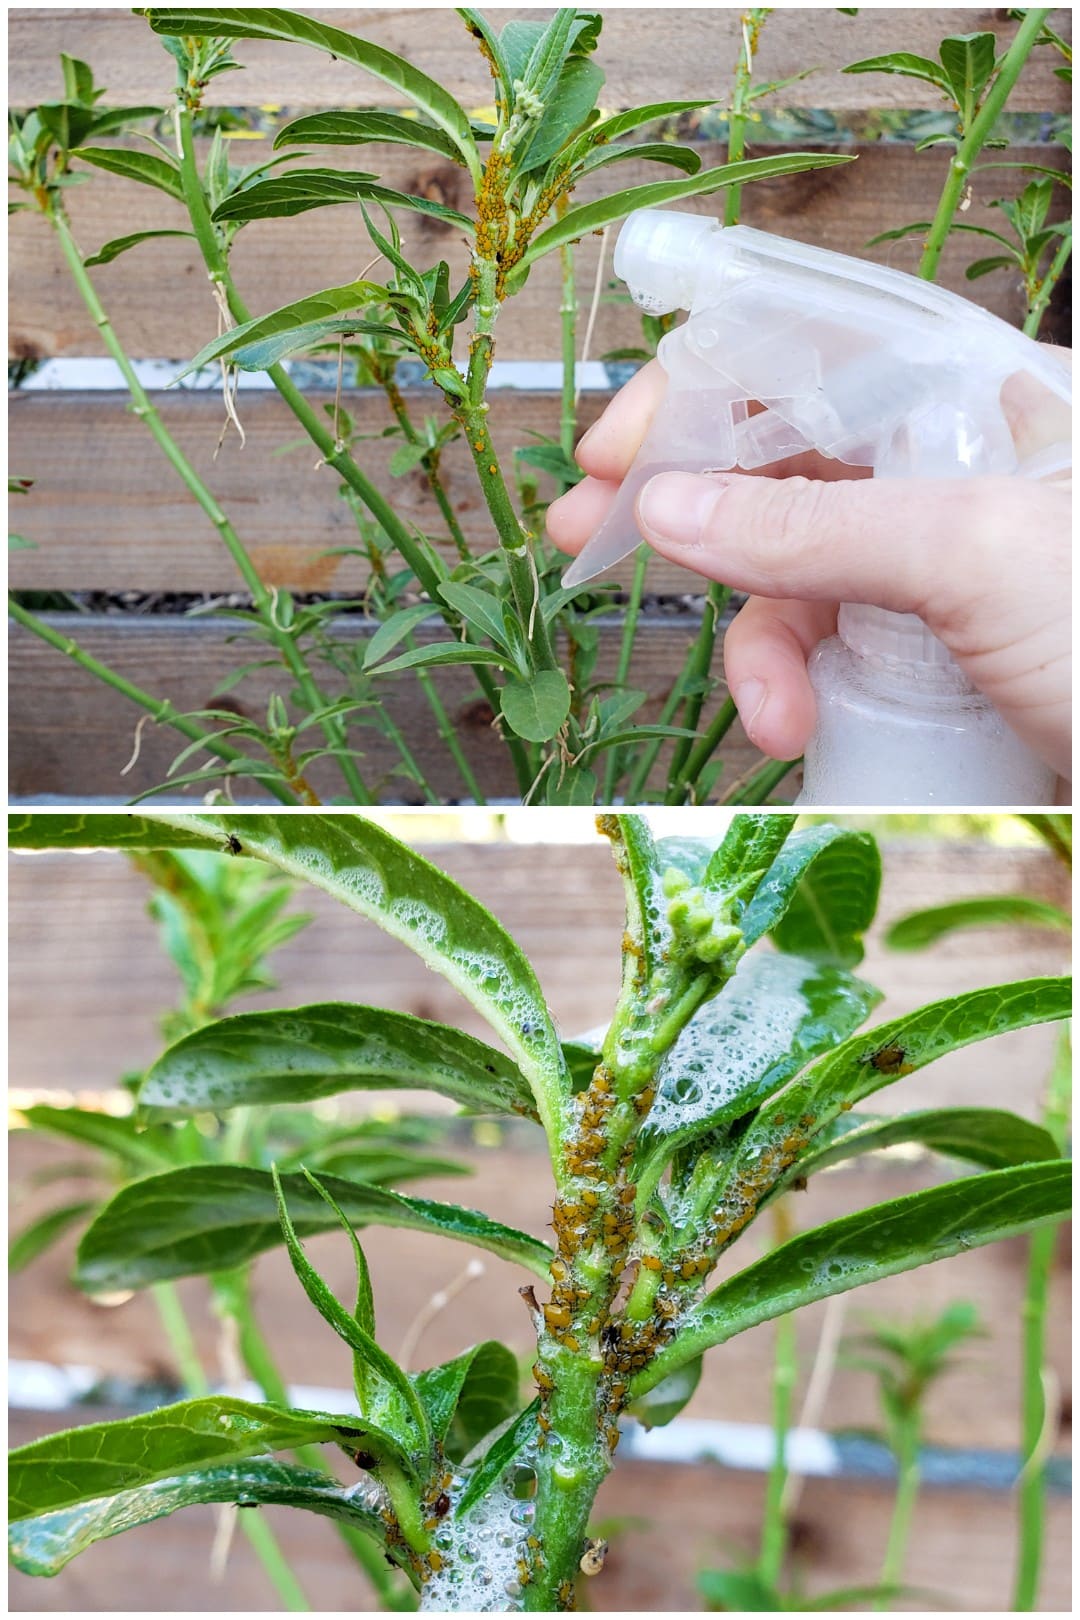 A two way image collage, the first image shows an aphid infested tropical milkweed plant with a hand holding a spray bottle next to it. The second image shows a close up image of a section of the plant after it has been sprayed with soap spray. There are visible suds lining up and down the plant, covering the aphids that remain on the plant. Using soap spray is a great way to get rid of aphids when they have colonized a plant. 